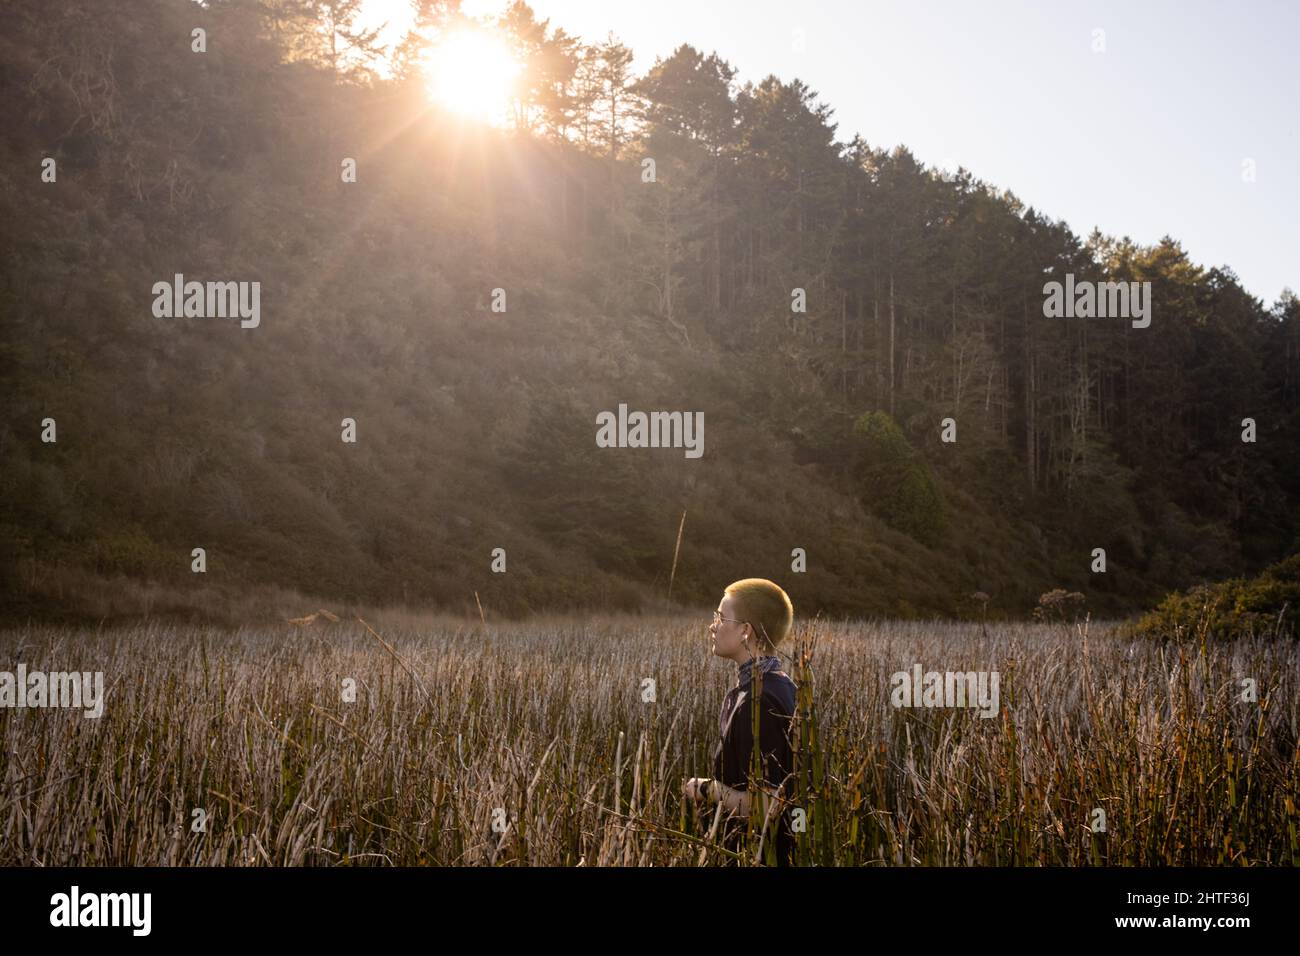 Person standing in tall grass with setting sun behind coastal hills Stock Photo